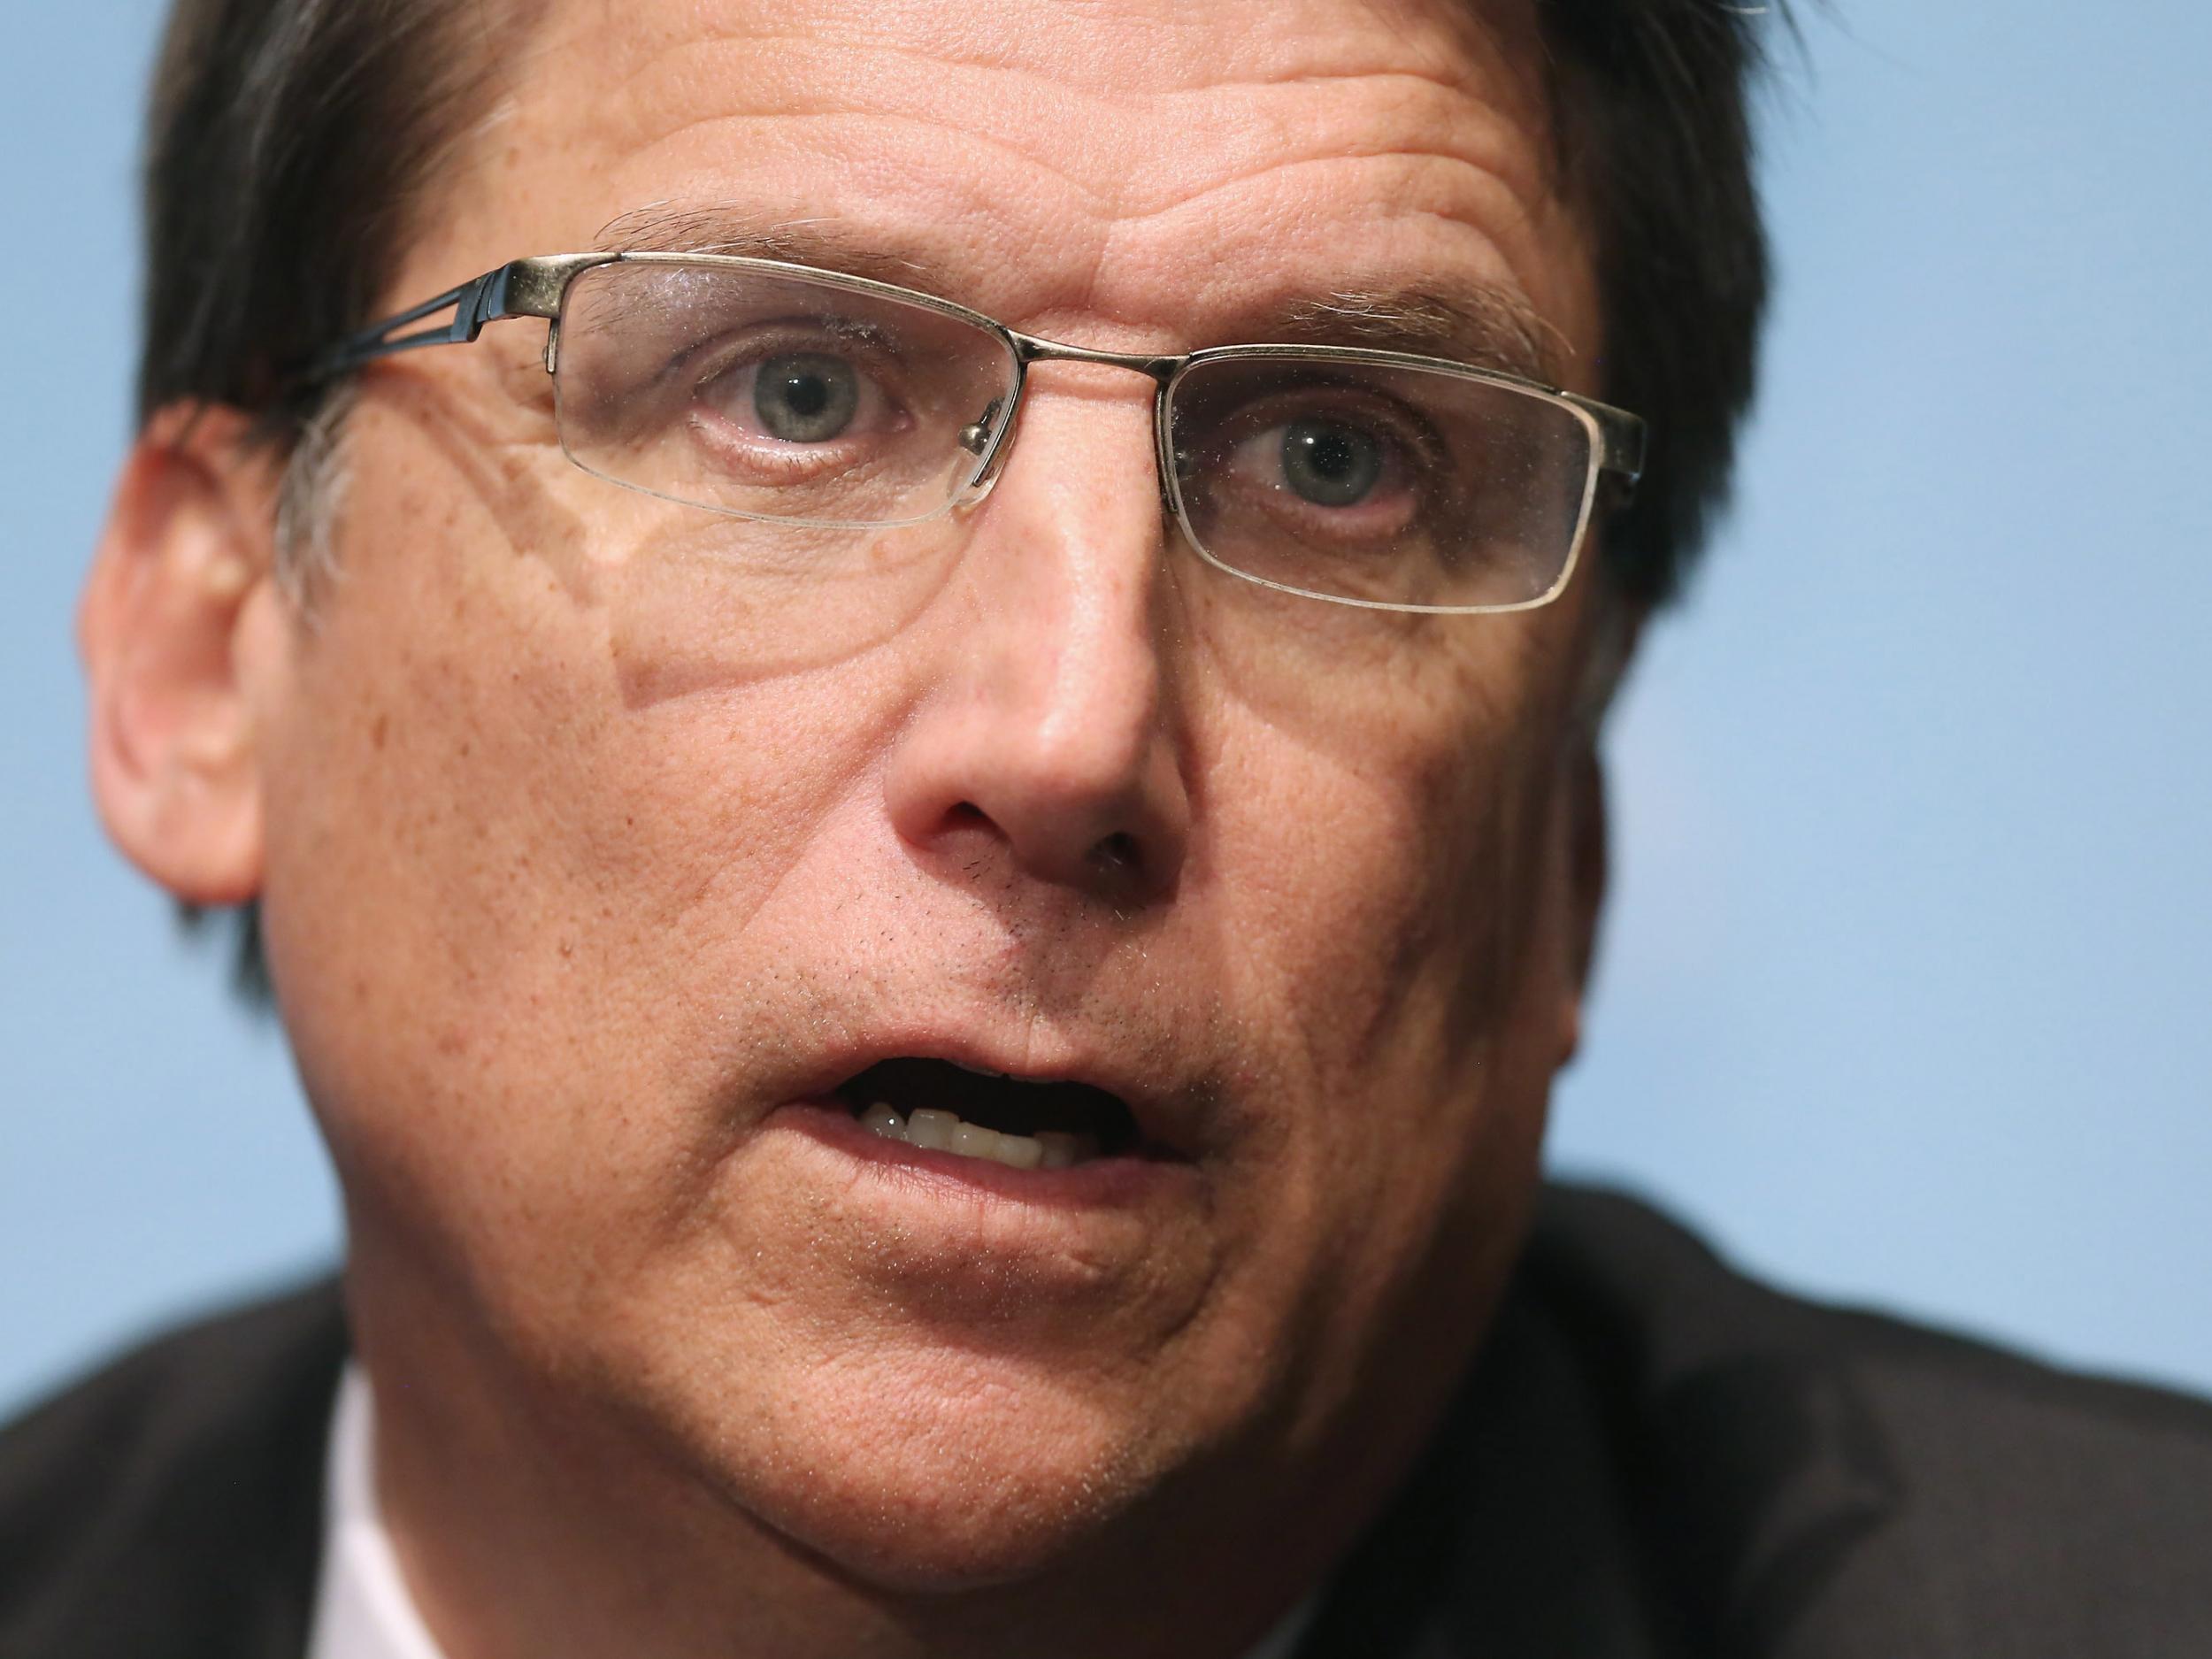 McCrory is claiming voter fraud